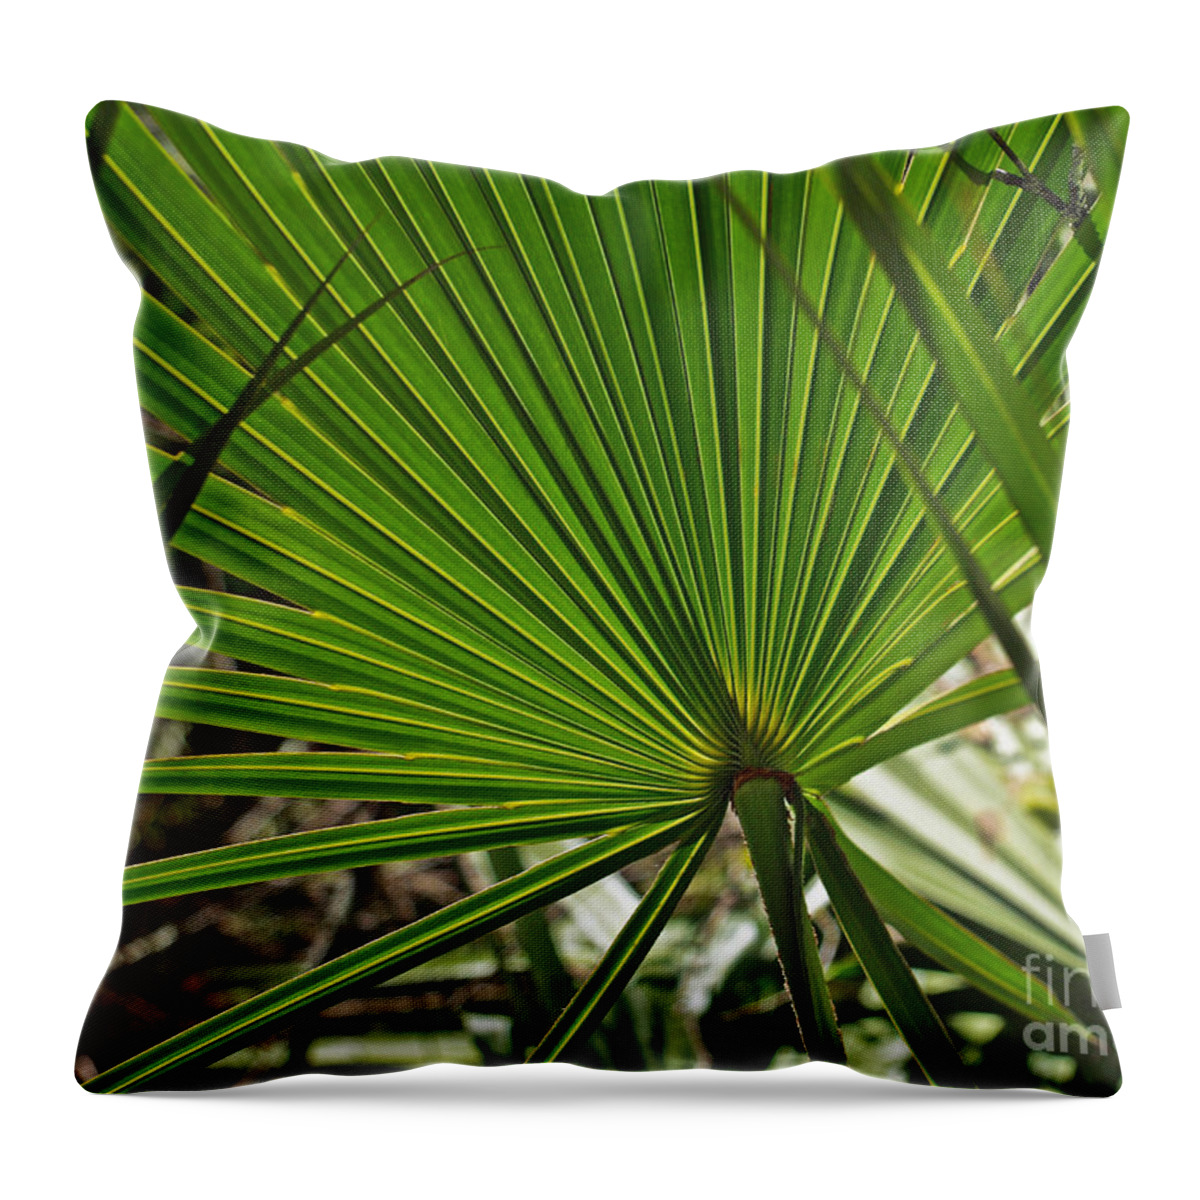 America Throw Pillow featuring the photograph Saw Palmetto by Howard Stapleton